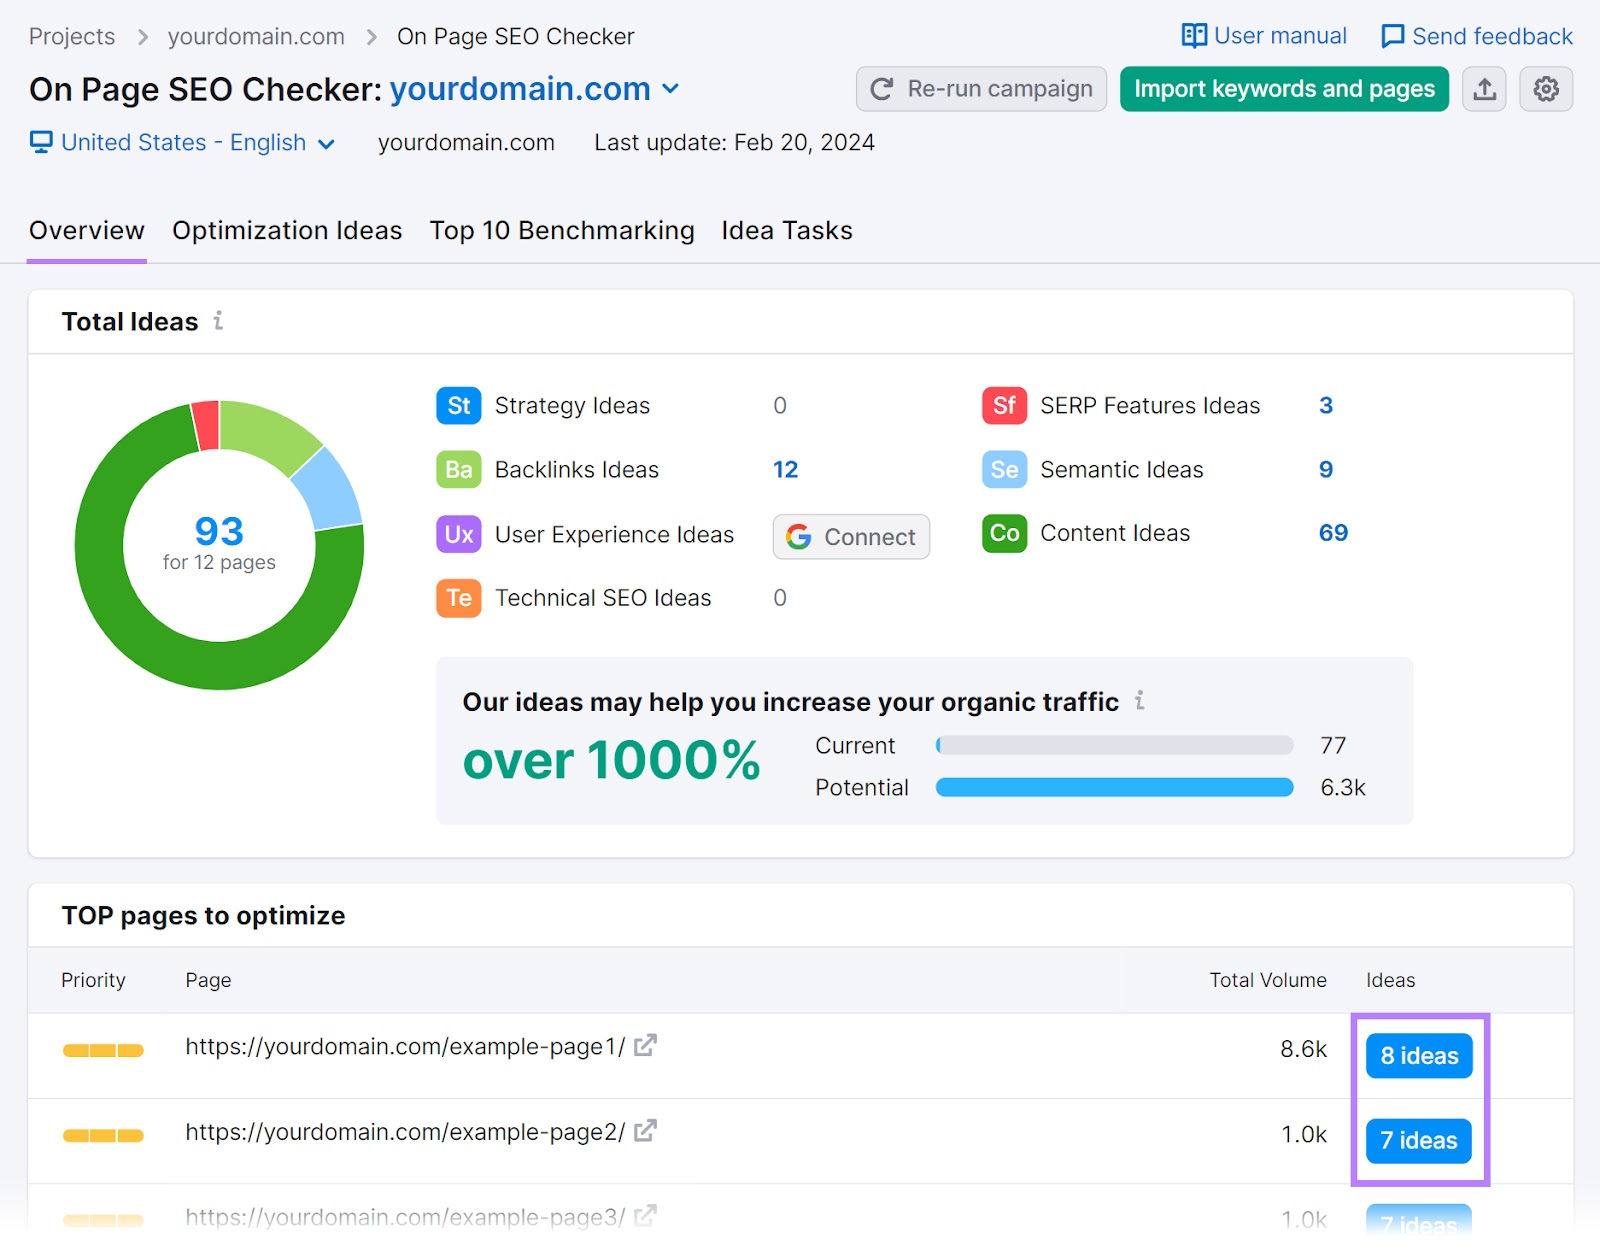 On Page SEO Checker tool "Overview" tab with the "# ideas" buttons highlighted in the "TOP pages to optimize" section.